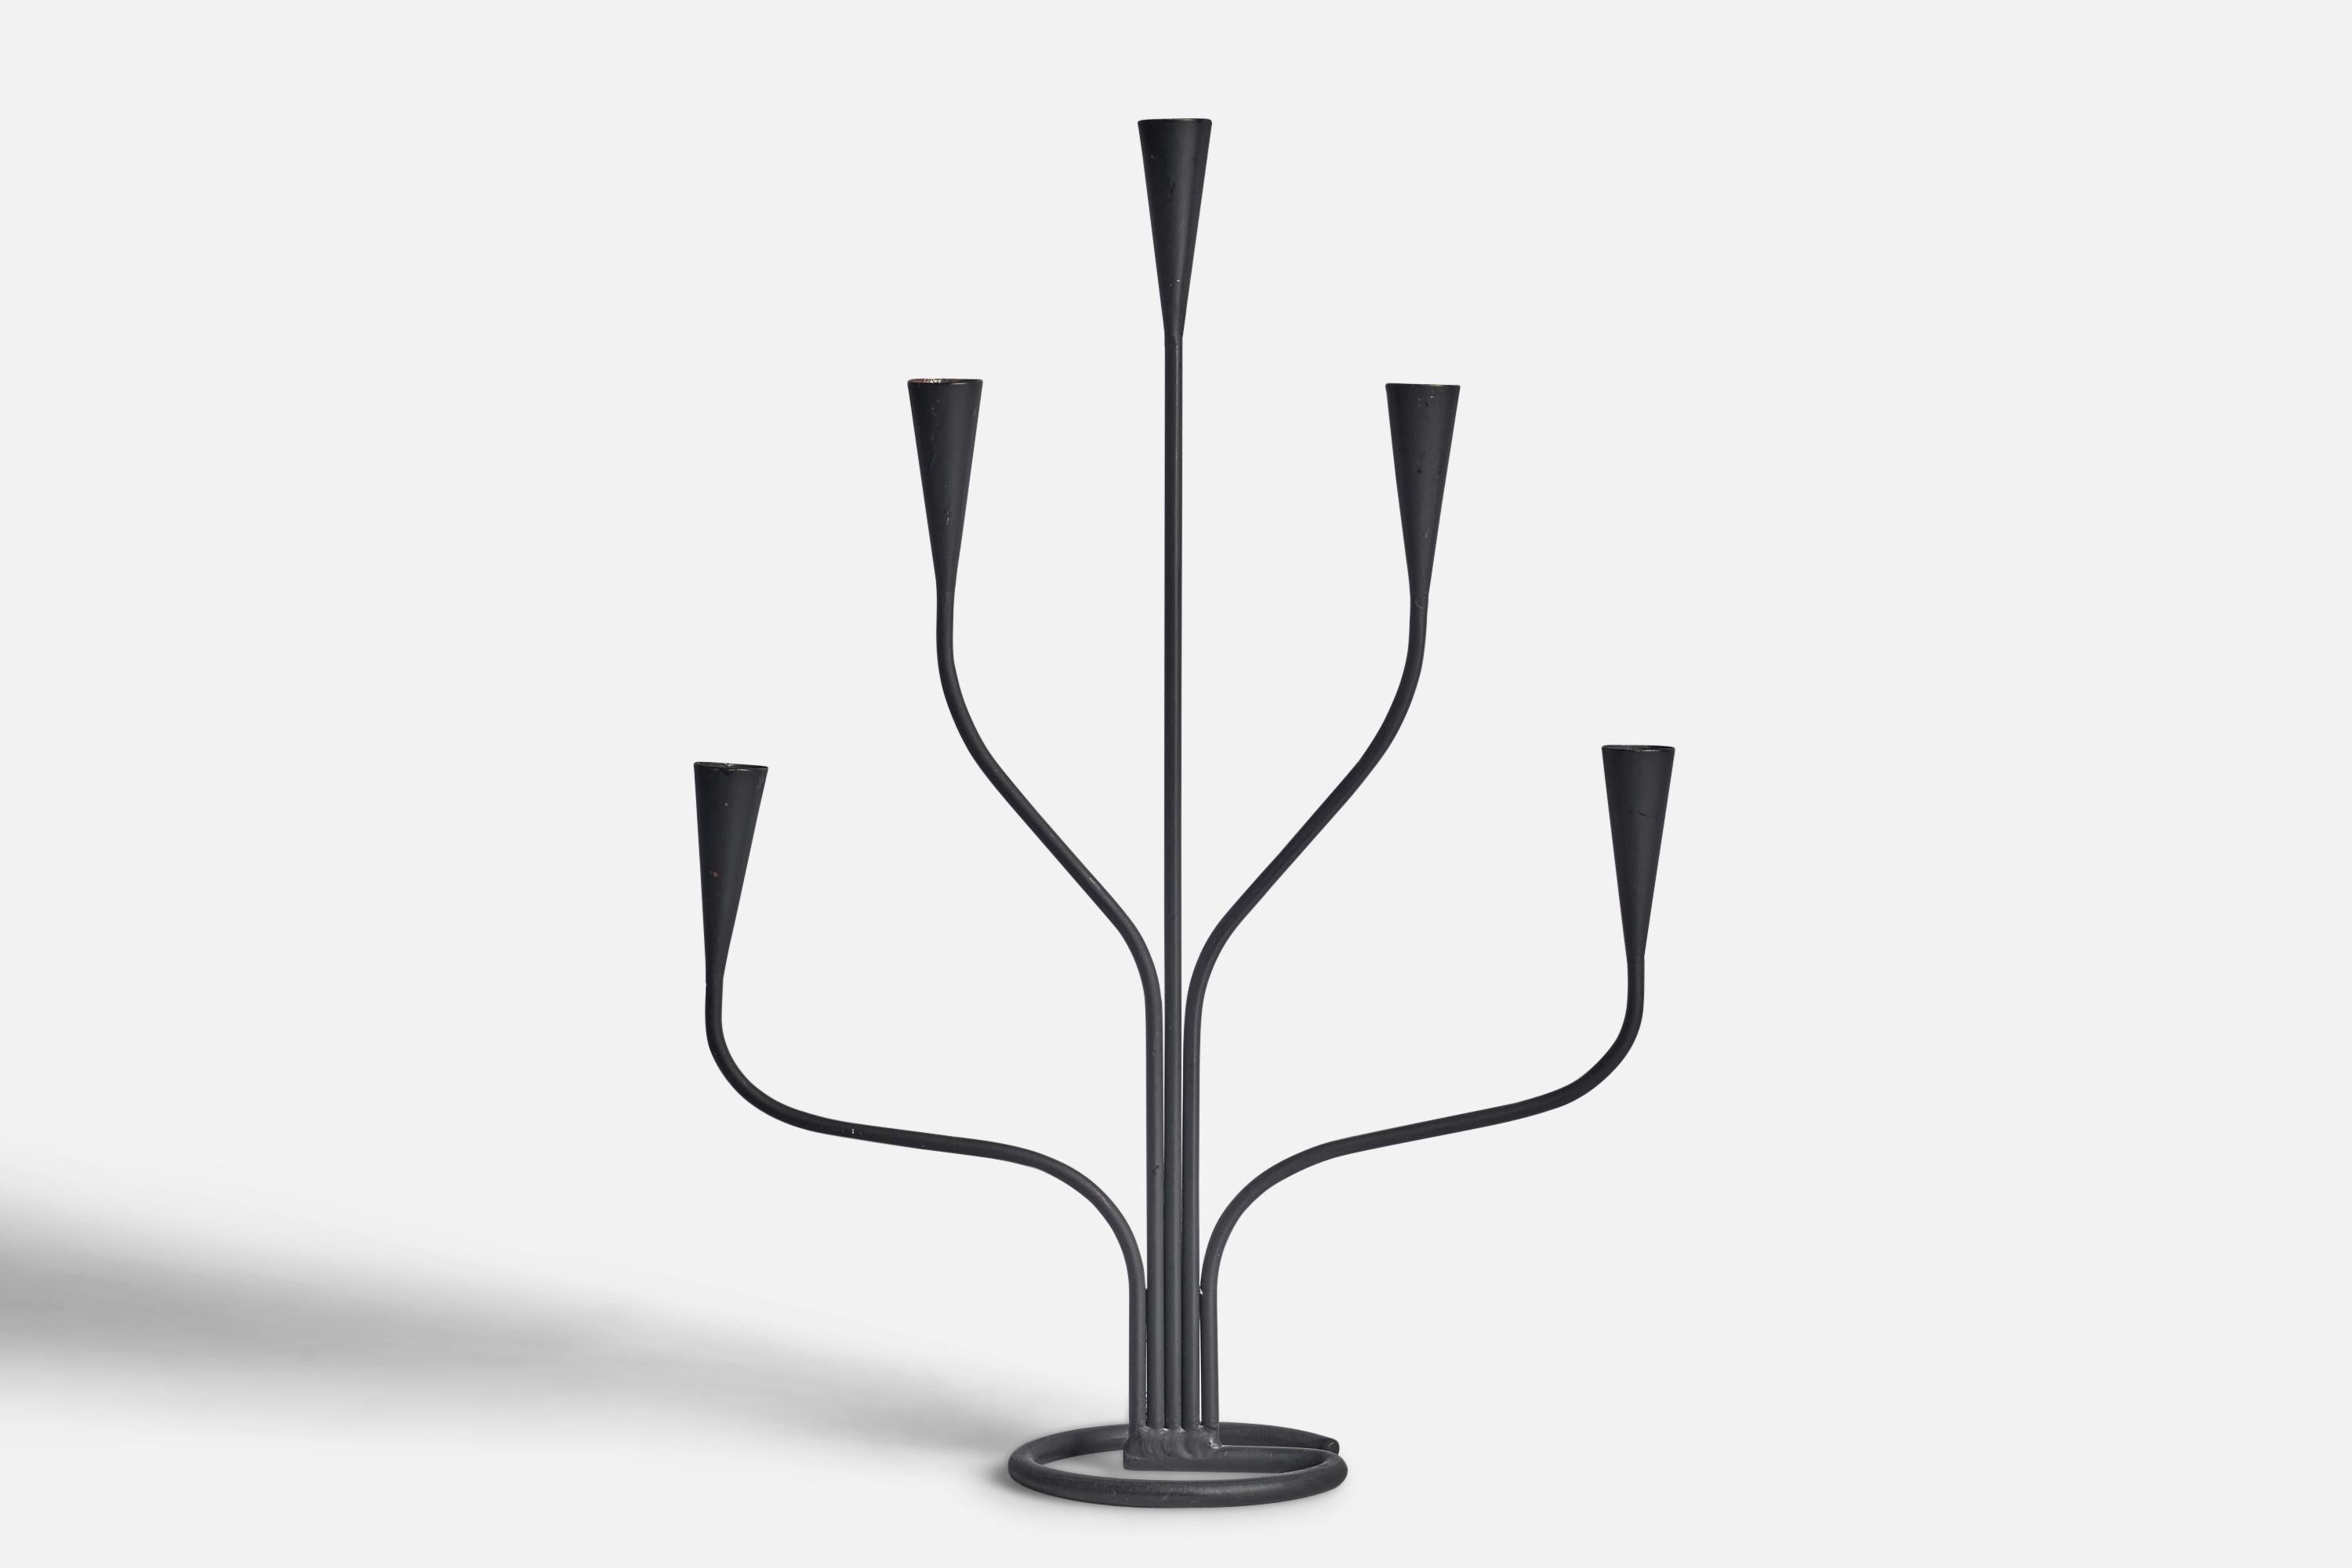 A five-armed black-painted iron candelabra designed and produced in Sweden, c. 1940s.

fits 0.8” diameter candles